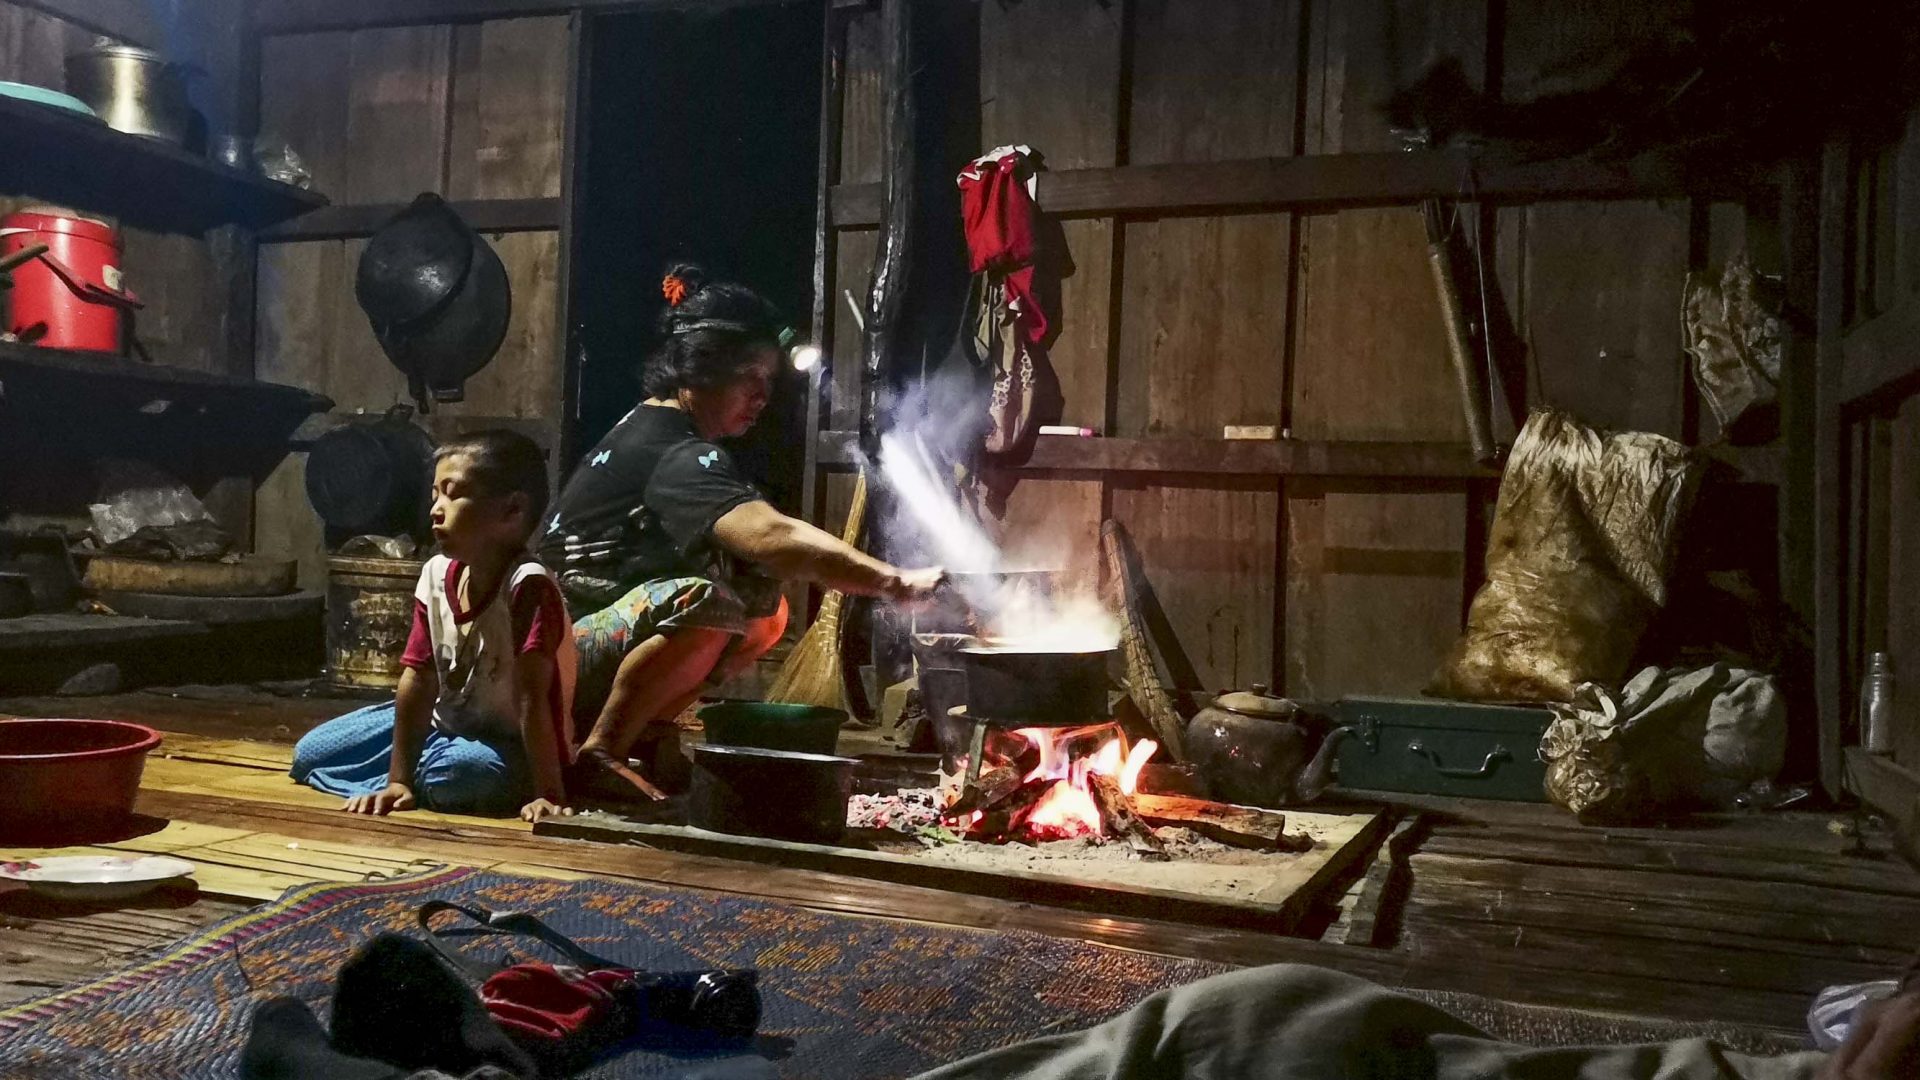 A woman cooks on a fire on the floor in a dimly lit room. A child is by her side.